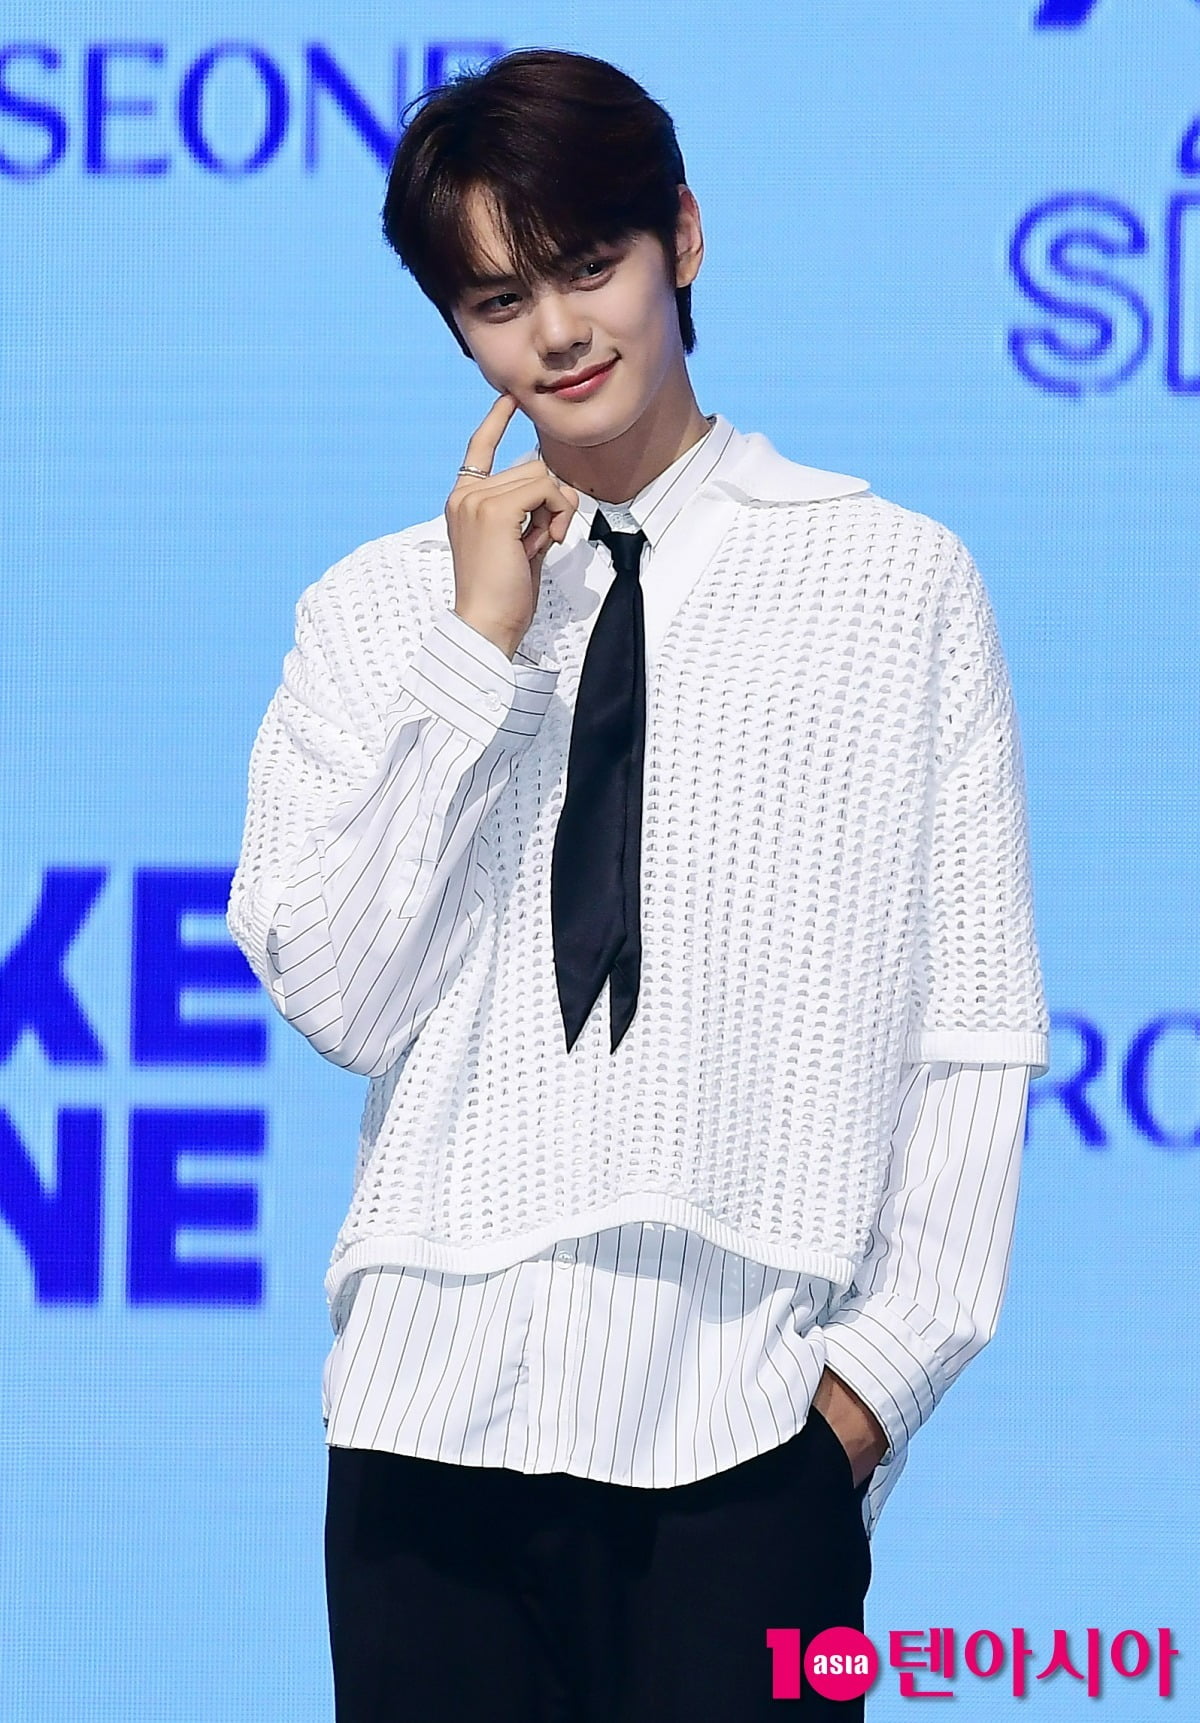 Zero Base One Kim Kyu-bin, controversy over words and actions after one month of debut